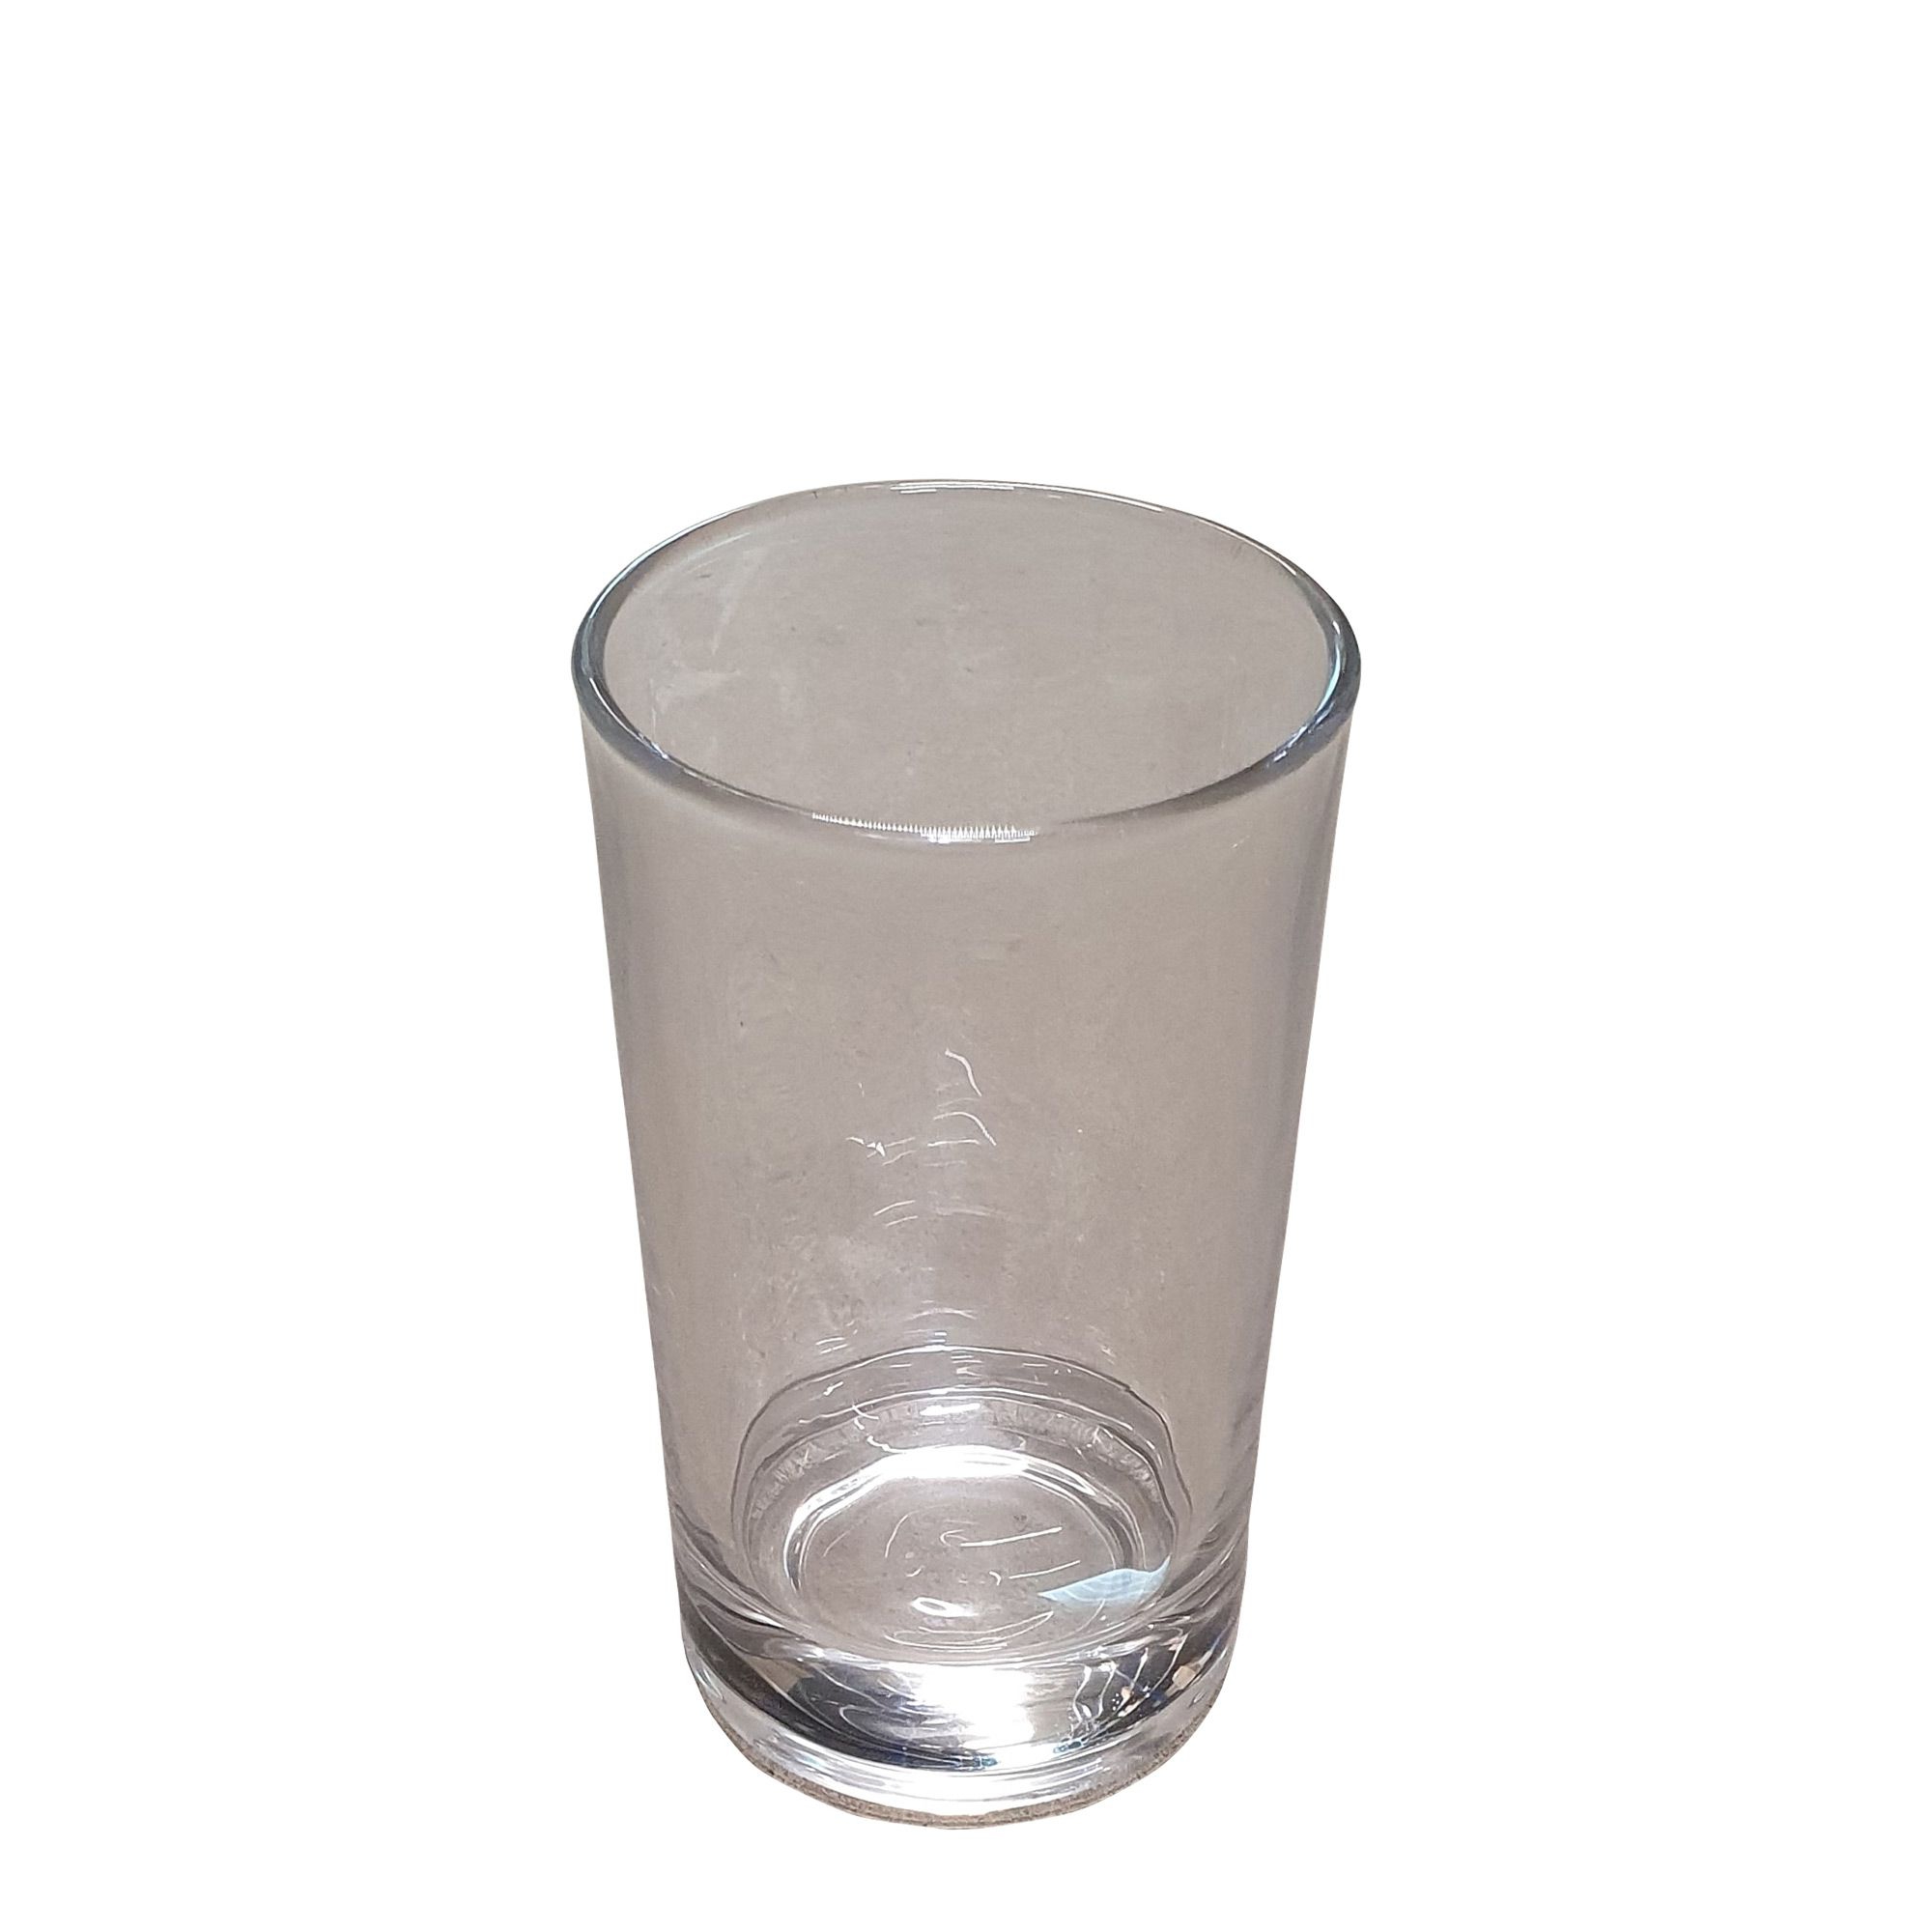 cilio - Replacement glass for picnic basket GARDA